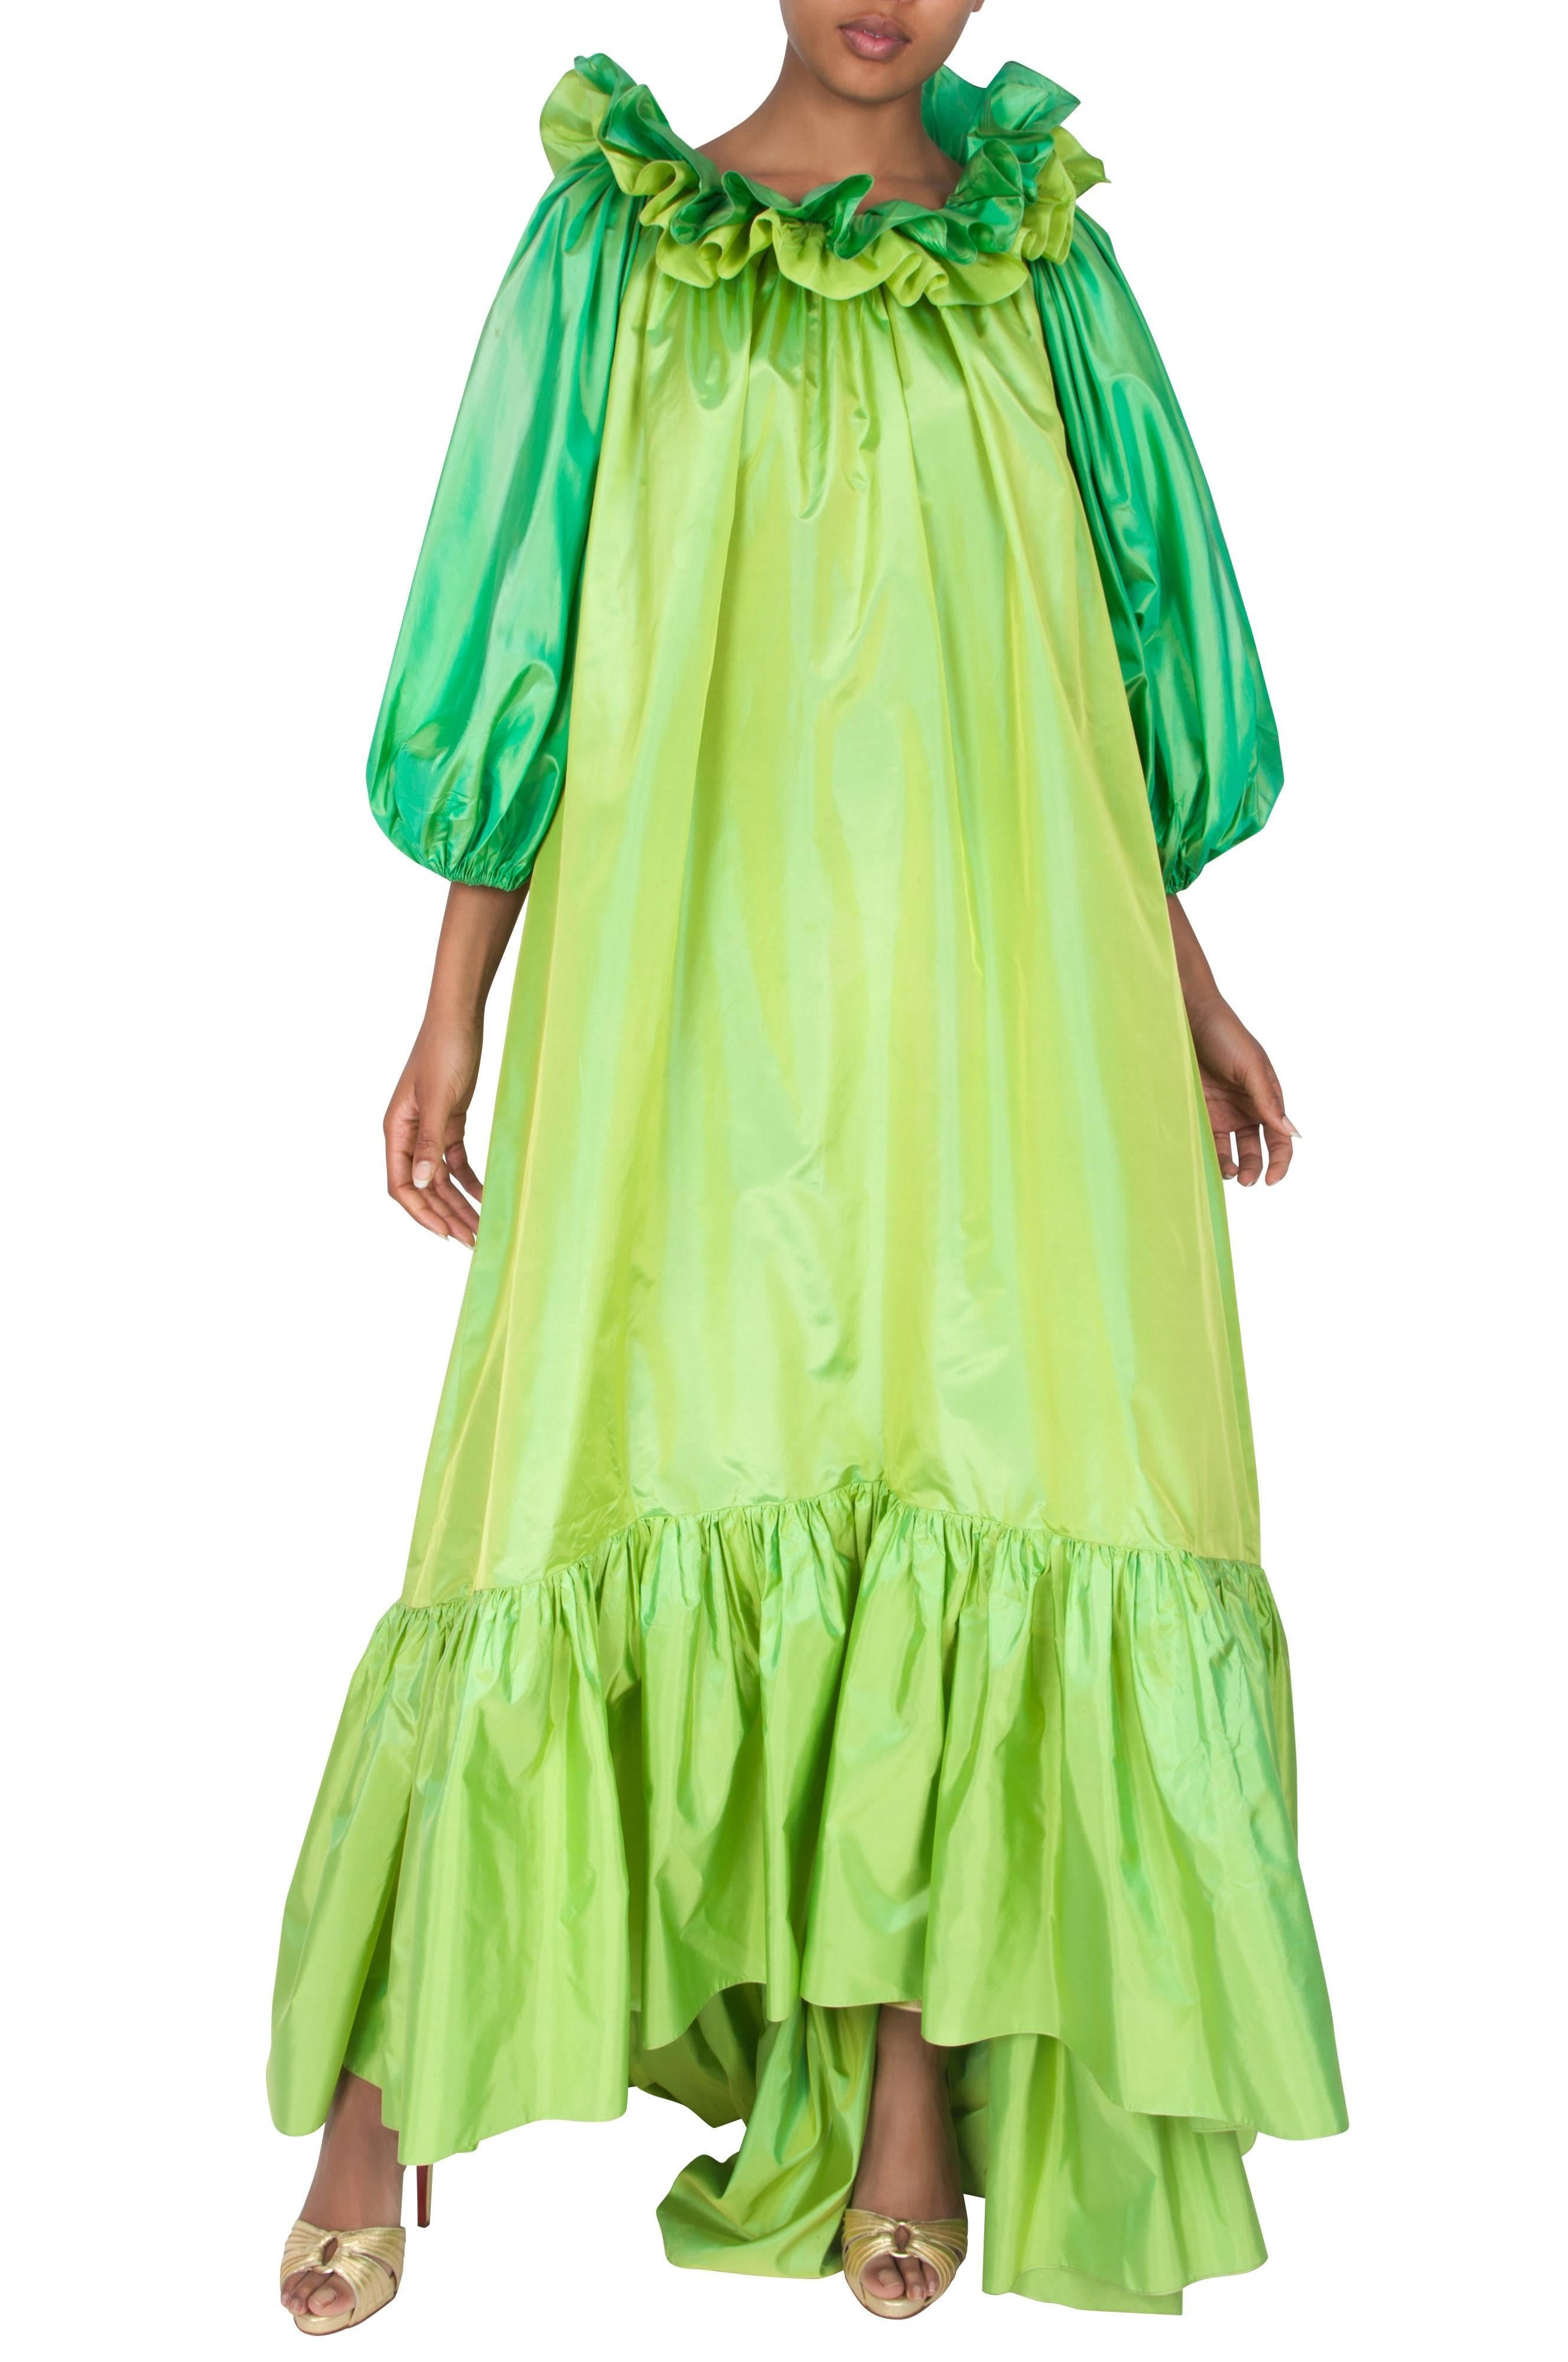 A stunning rare Yves Saint Laurent couture lime green silk ball gown. The full-length dress has a loose A-line shape and features dramatic puffed emerald green three-quarter length sleeves and a layered two-tone ruffled collar. The tiered hem